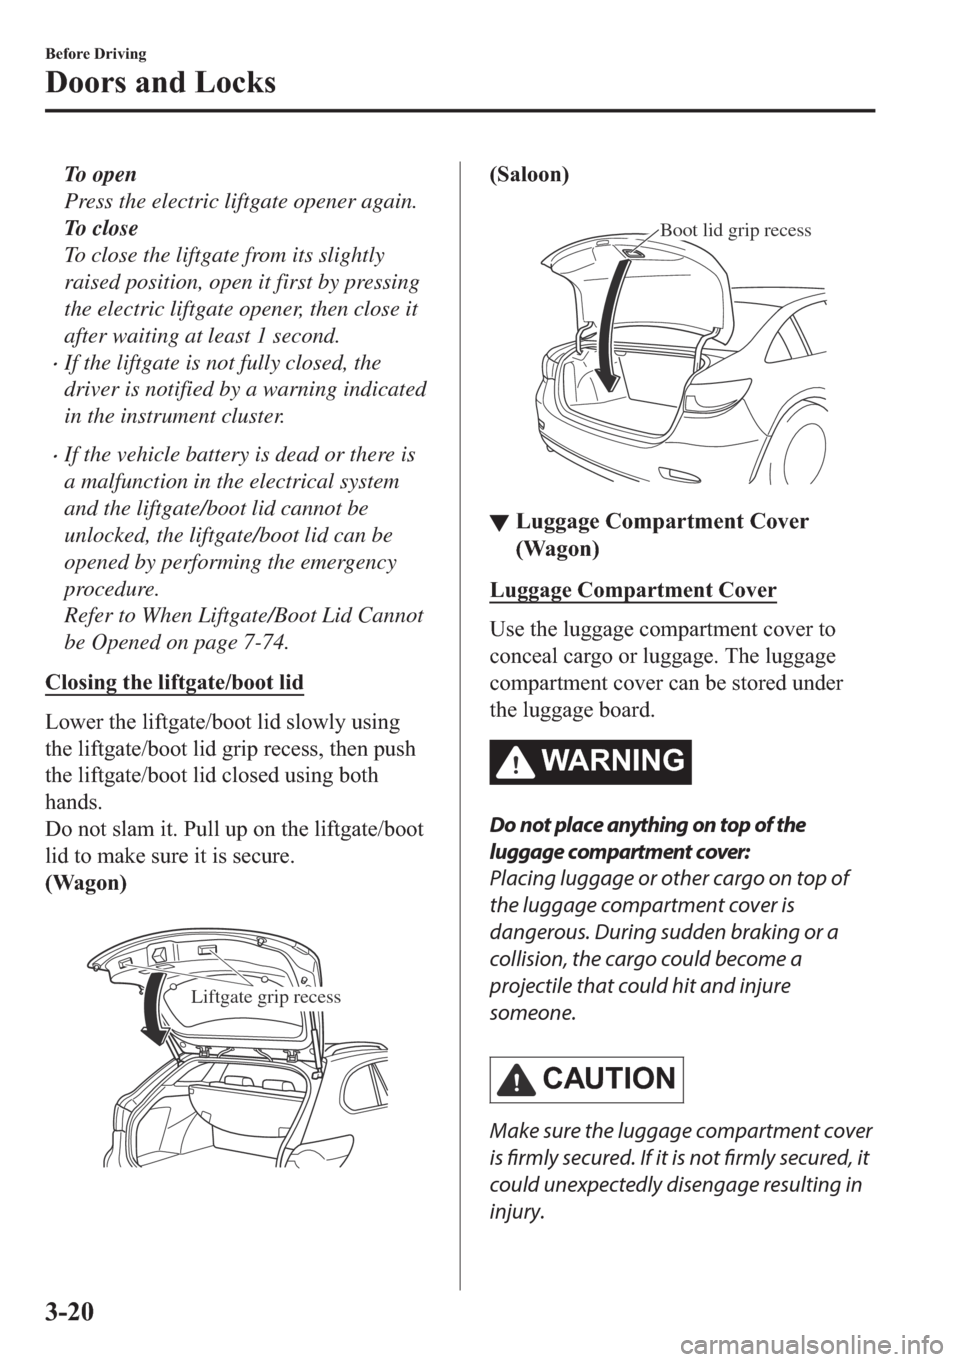 MAZDA MODEL 6 2018  Owners Manual (in English) To open
Press the electric liftgate opener again.
To  c l o s e
To close the liftgate from its slightly
raised position, open it first by pressing
the electric liftgate opener, then close it
after wai